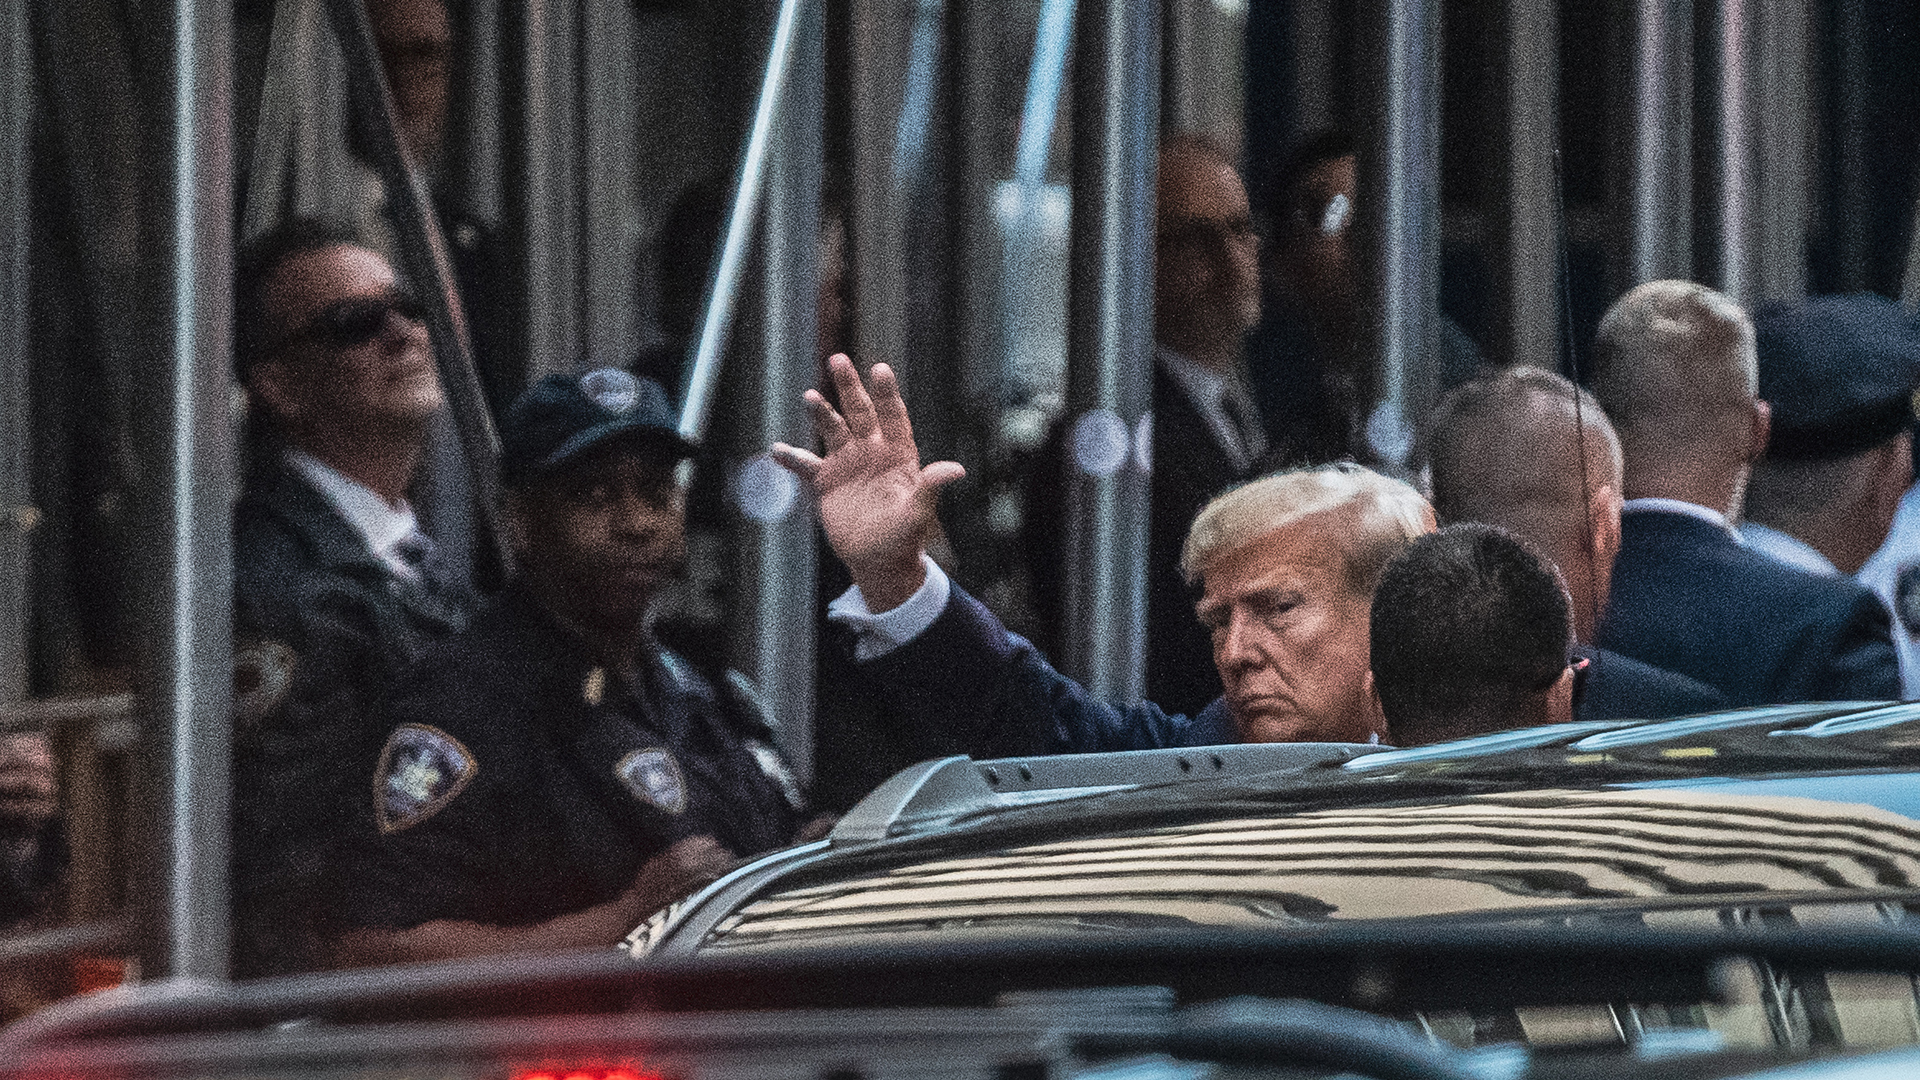 Former President Donald Trump waves as he steps out of his vehicle before entering New York Criminal Court on Tuesday.